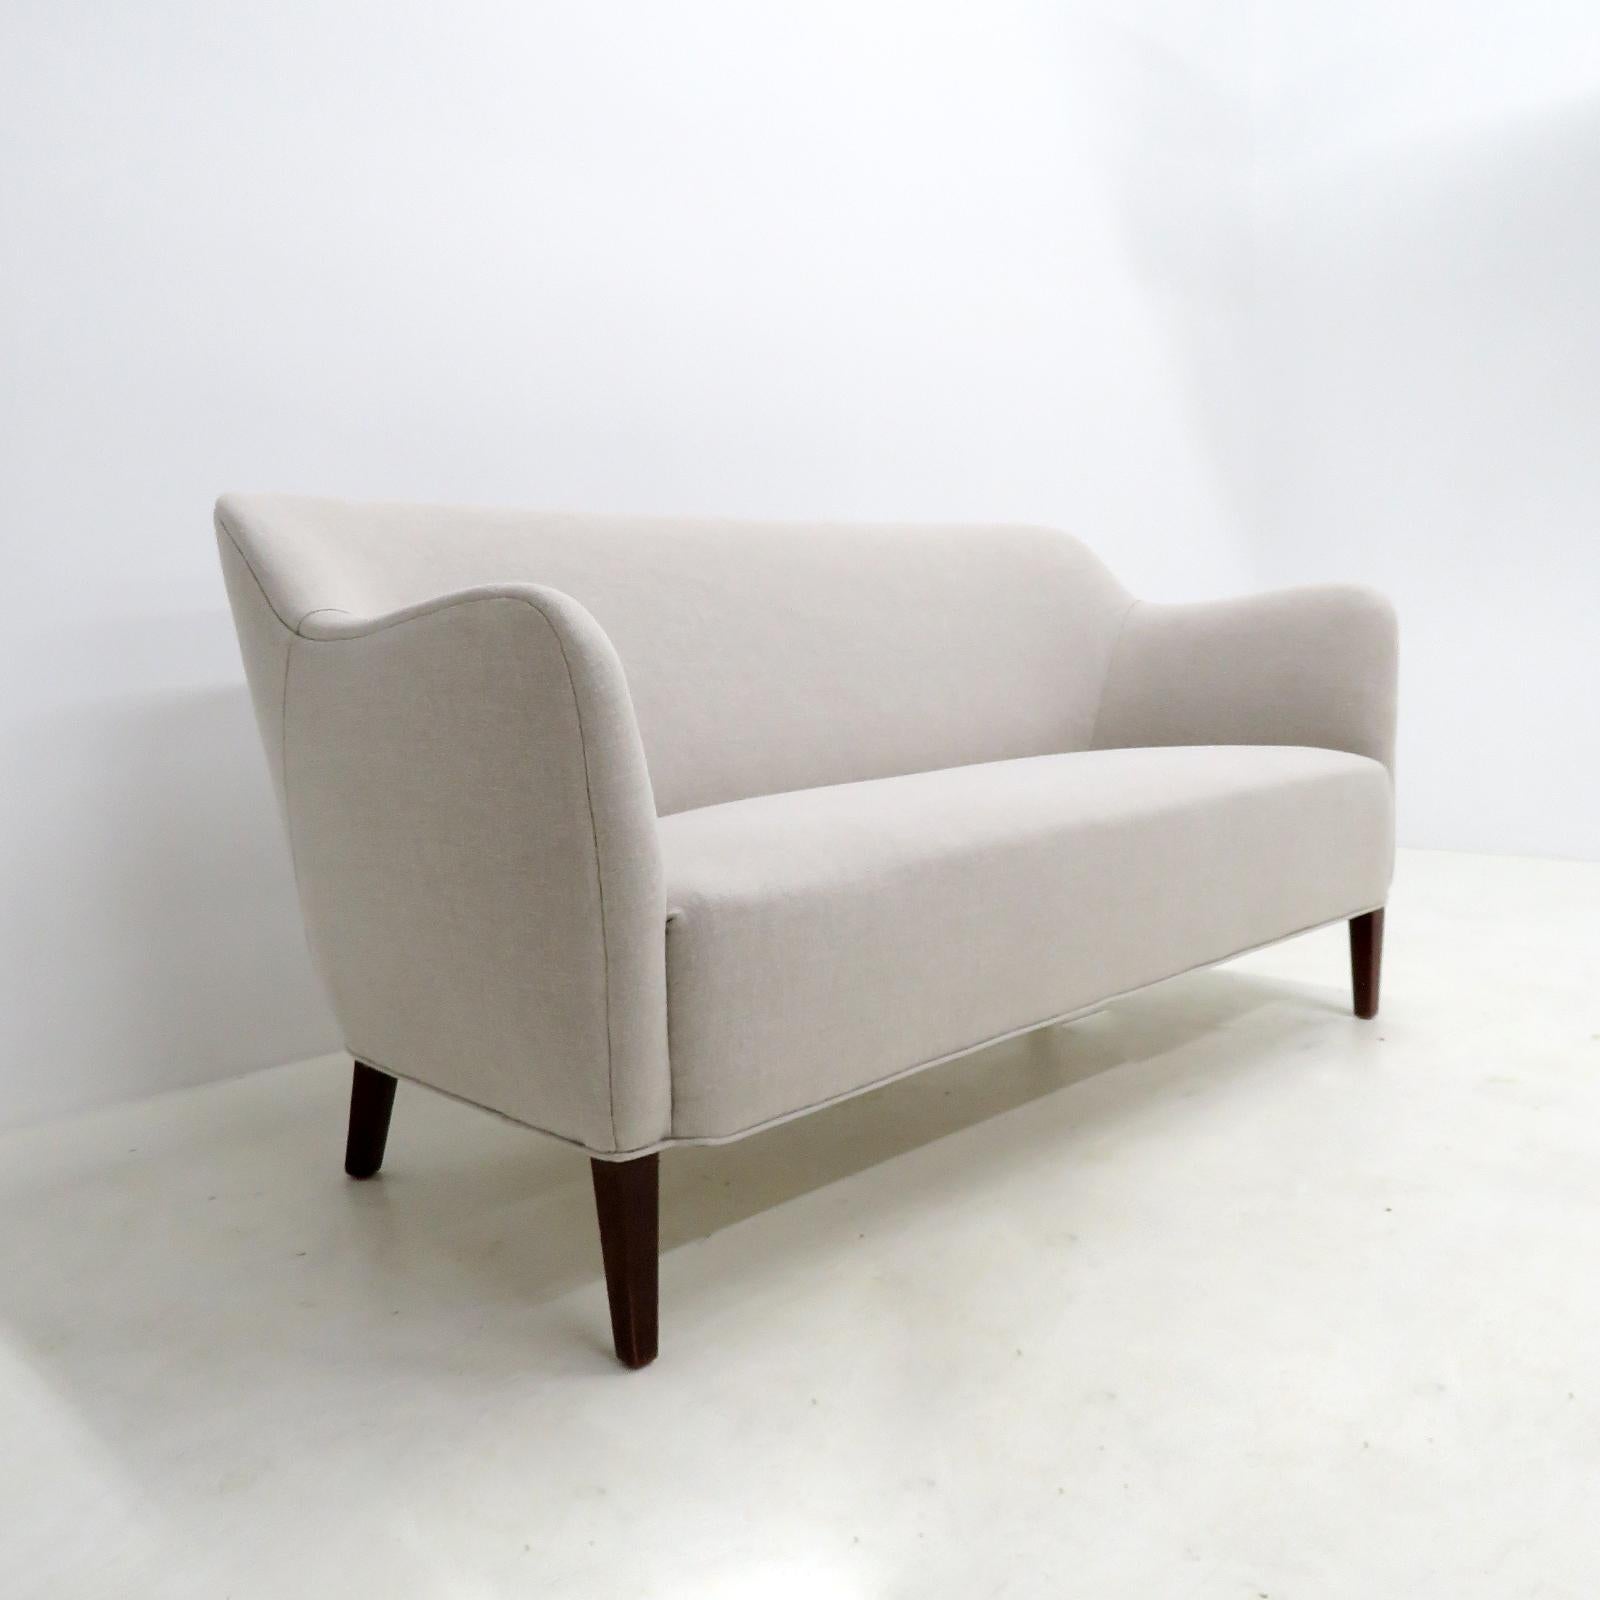 Stained Danish Modern Settee by Jacob Kjaer, 1940 For Sale